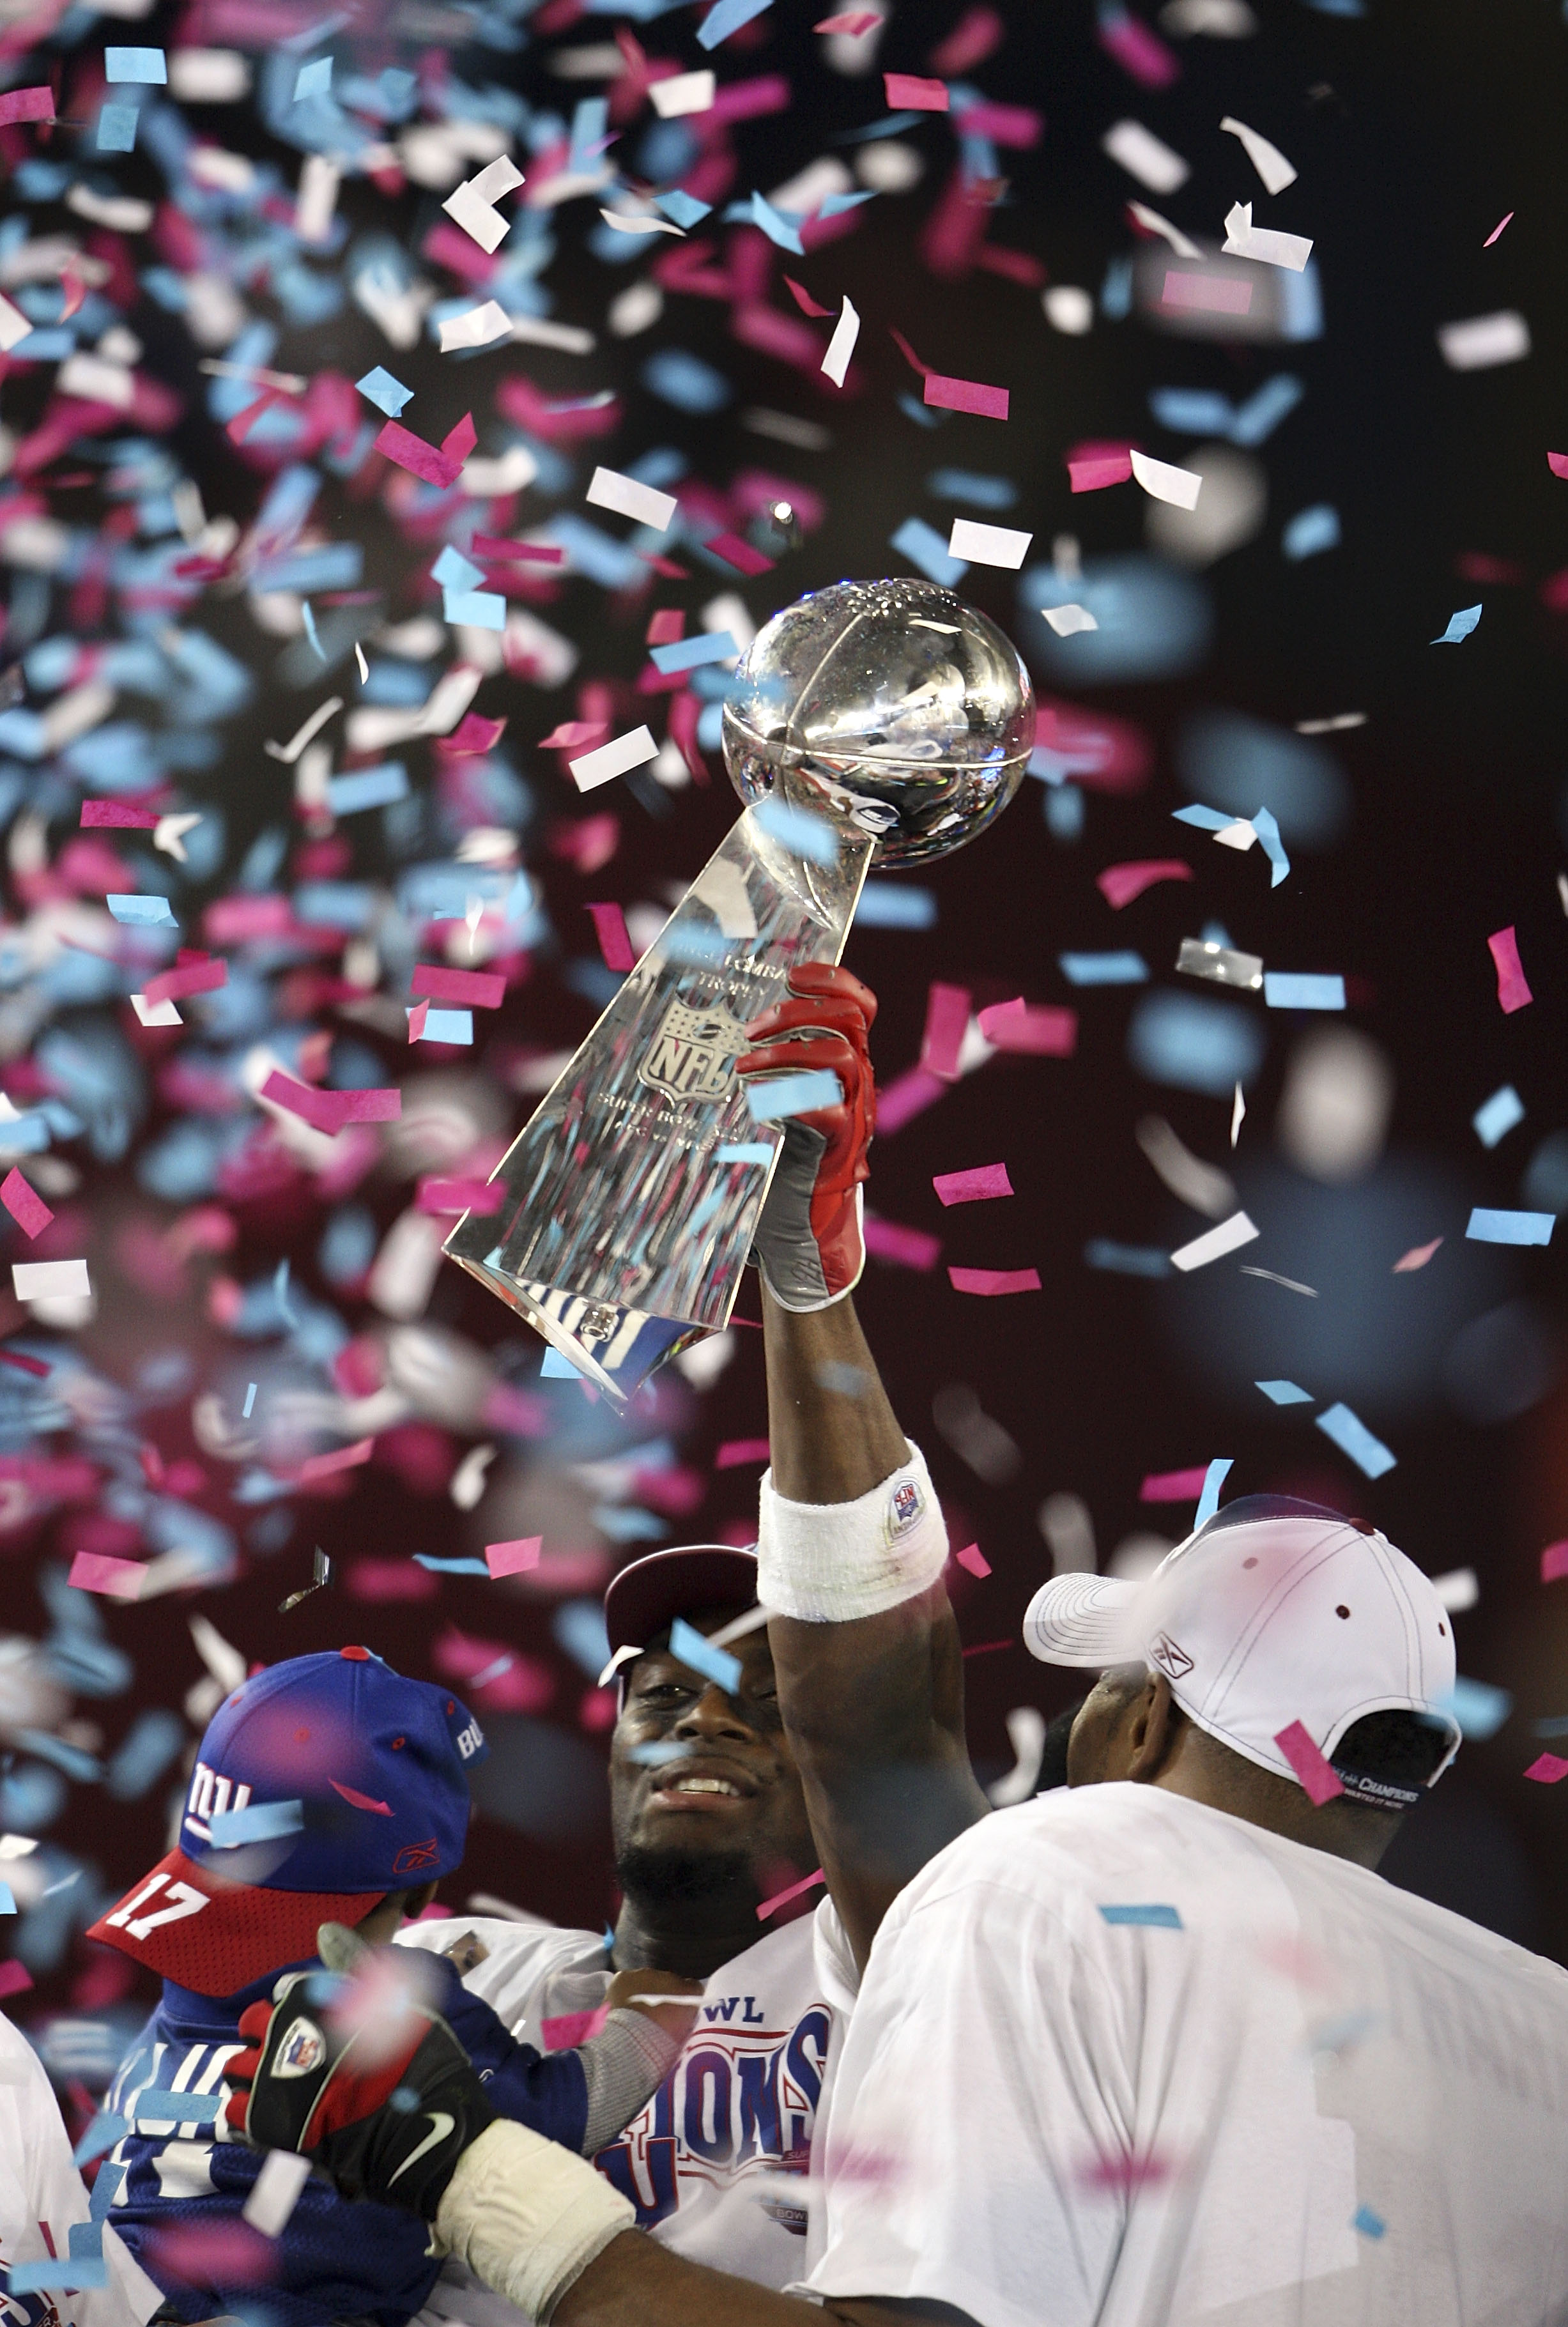 GLENDALE, AZ - FEBRUARY 03:  Wide receiver Plaxico Burress #17 of the New York Giants holds the Vince Lombardi Trophy after defeating the New England Patriots 17-14 in Super Bowl XLII on February 3, 2008 at the University of Phoenix Stadium in Glendale, A